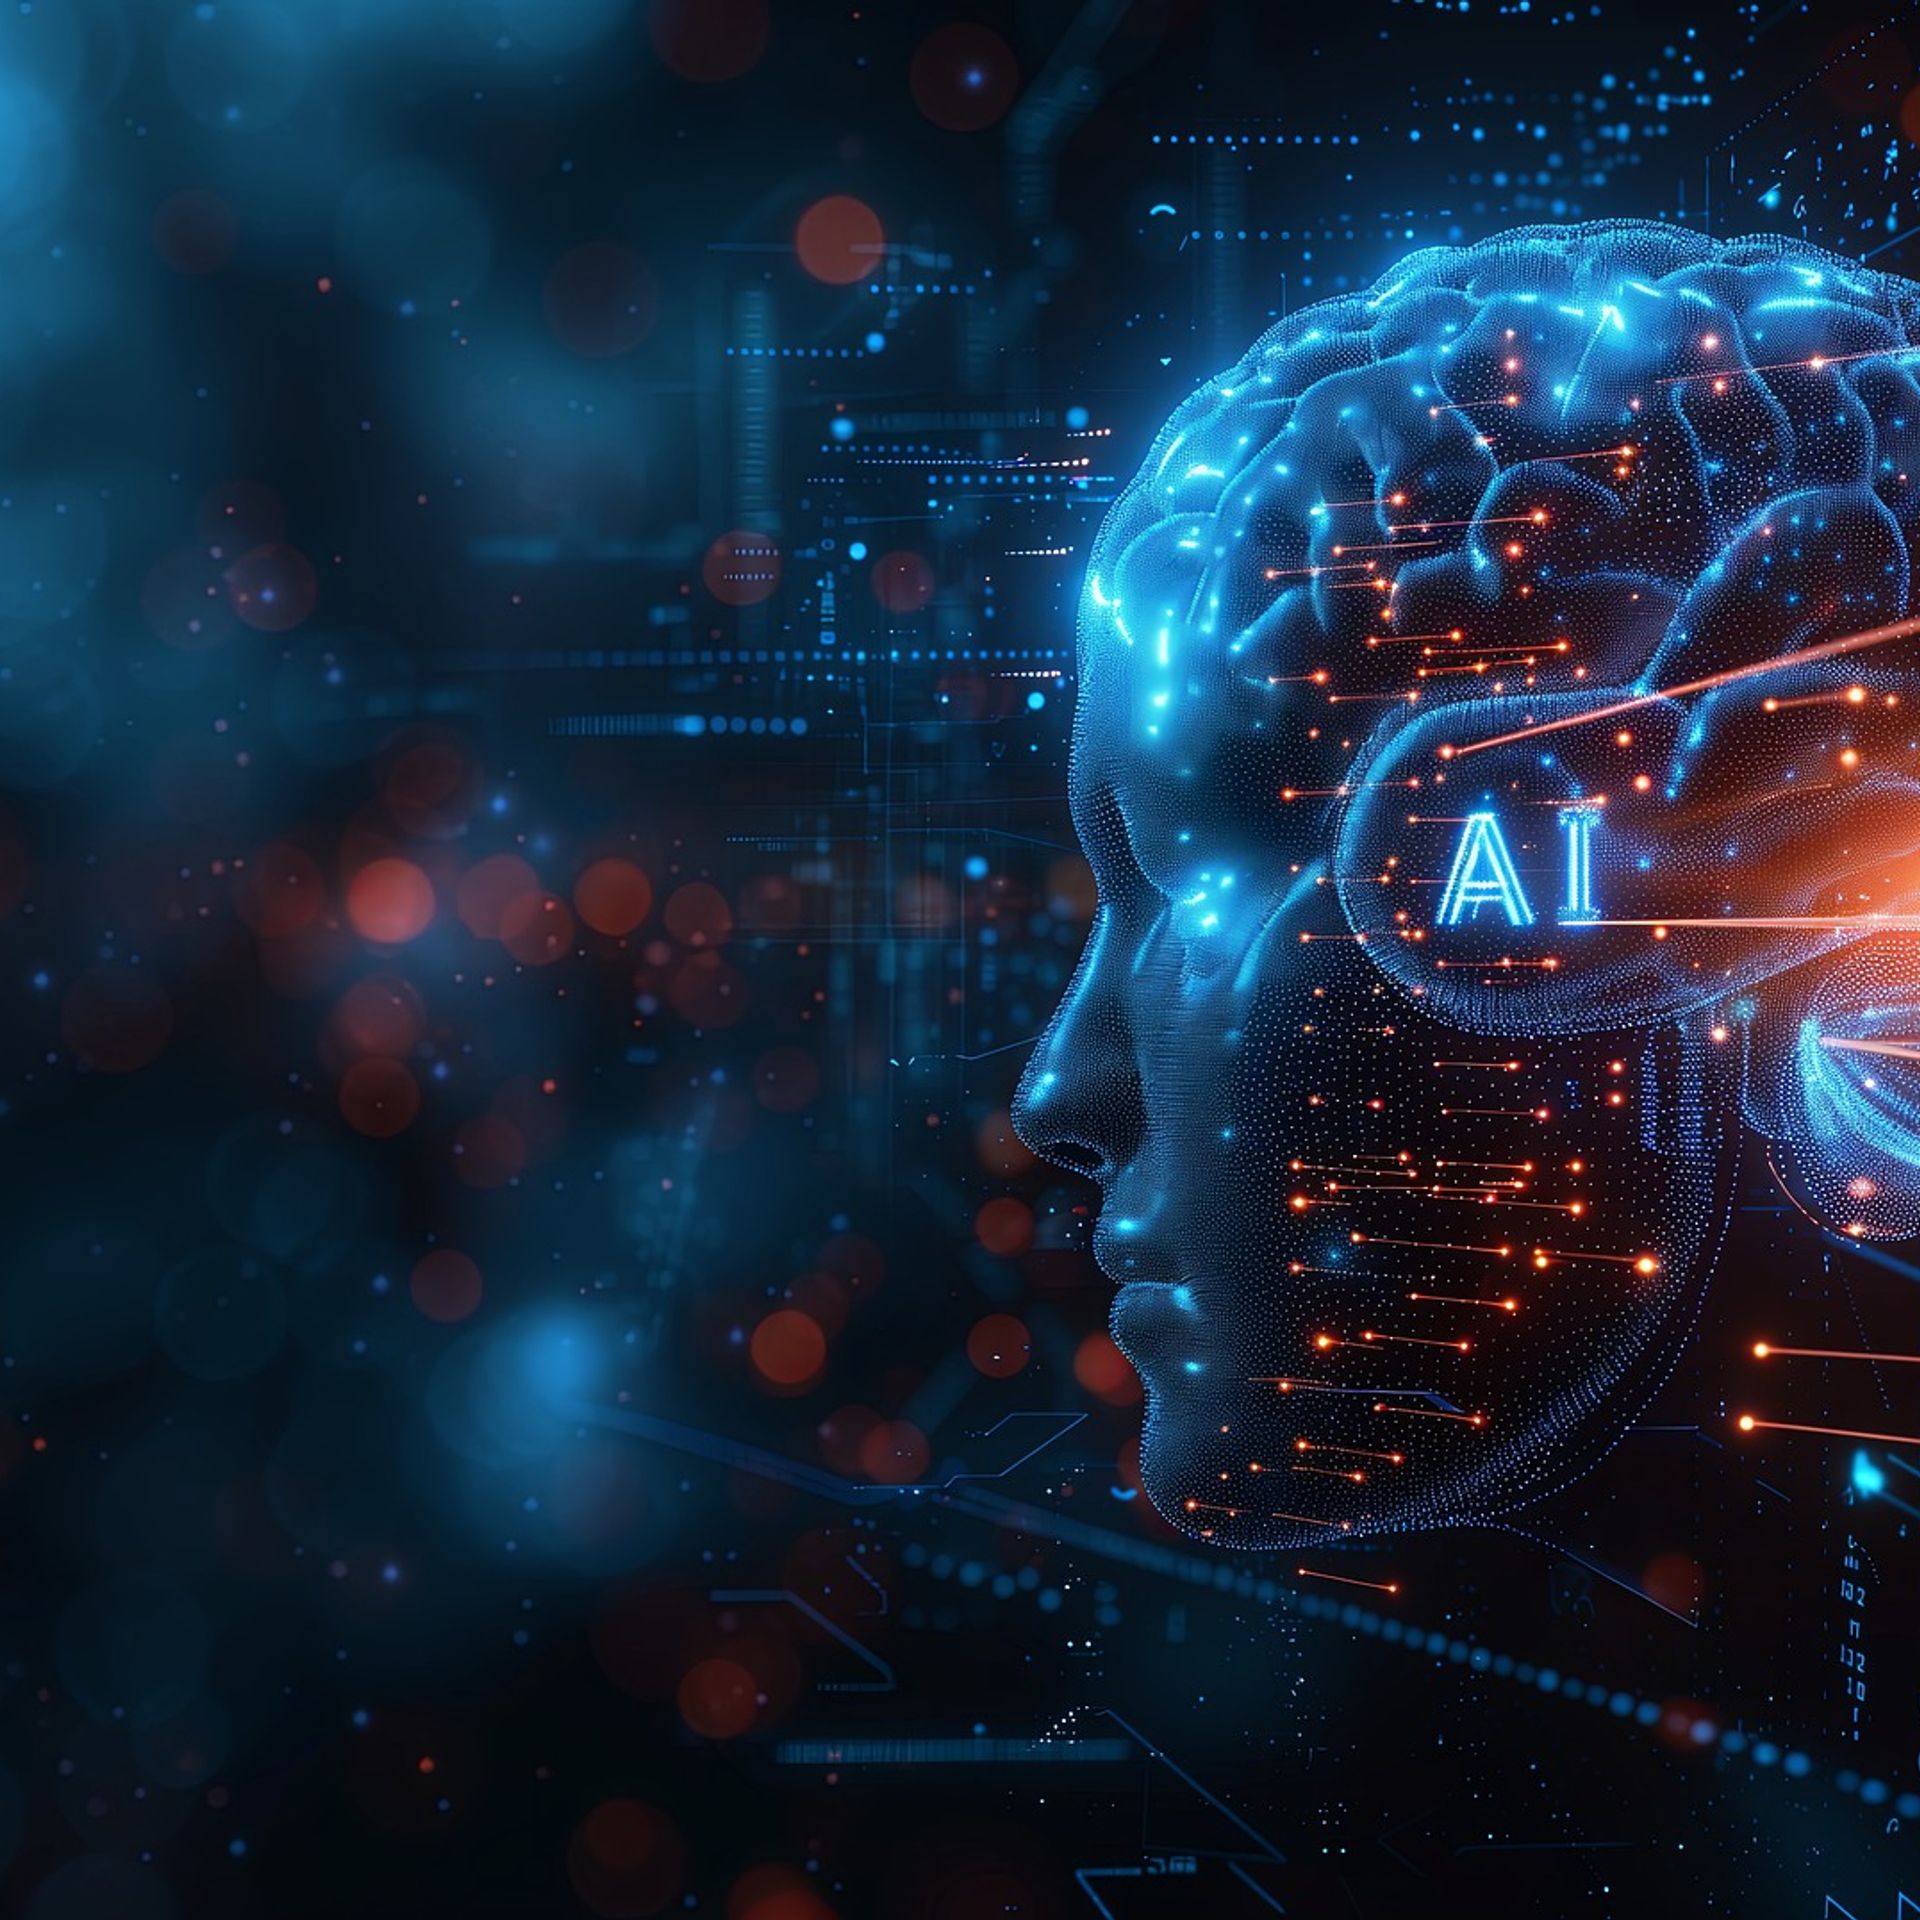 Only 5% of enterprises have mature Gen AI initiatives: Genpact and HFS Research